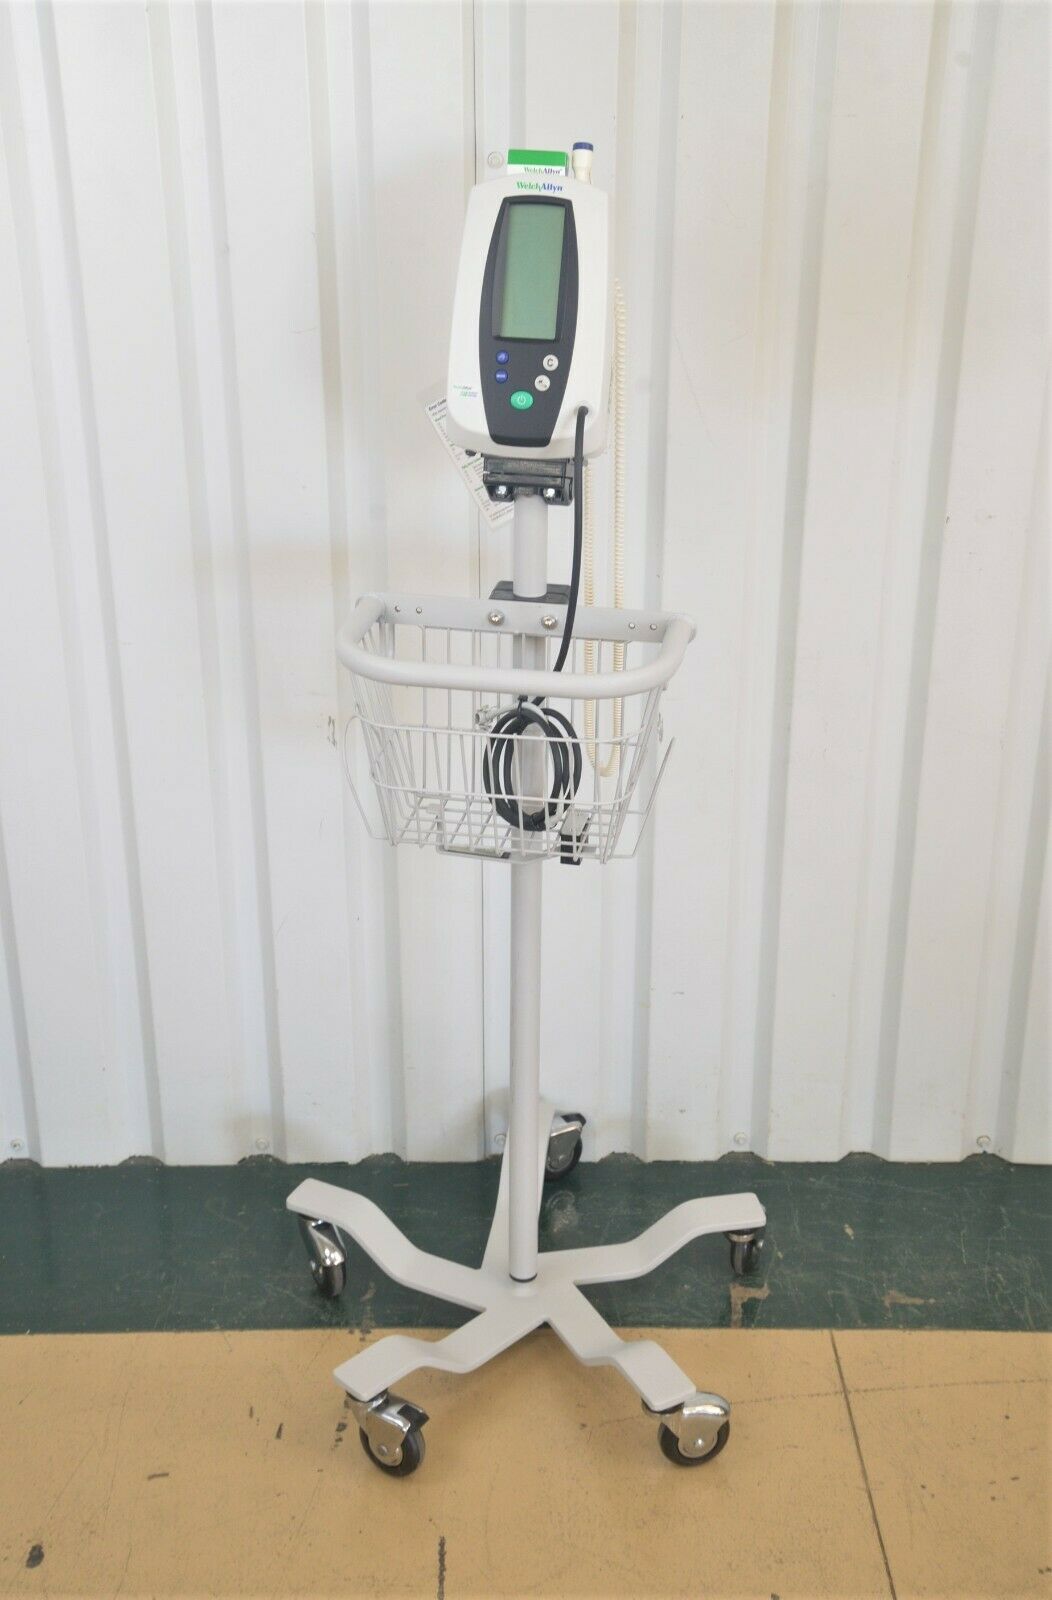 https://www.rhinotradellc.com/wp-content/uploads/imported/6/Welch-Allyn-420-Series-Spot-Vital-Signs-Patient-Monitor-w-Rolling-Stand-25009-184632624636.JPG